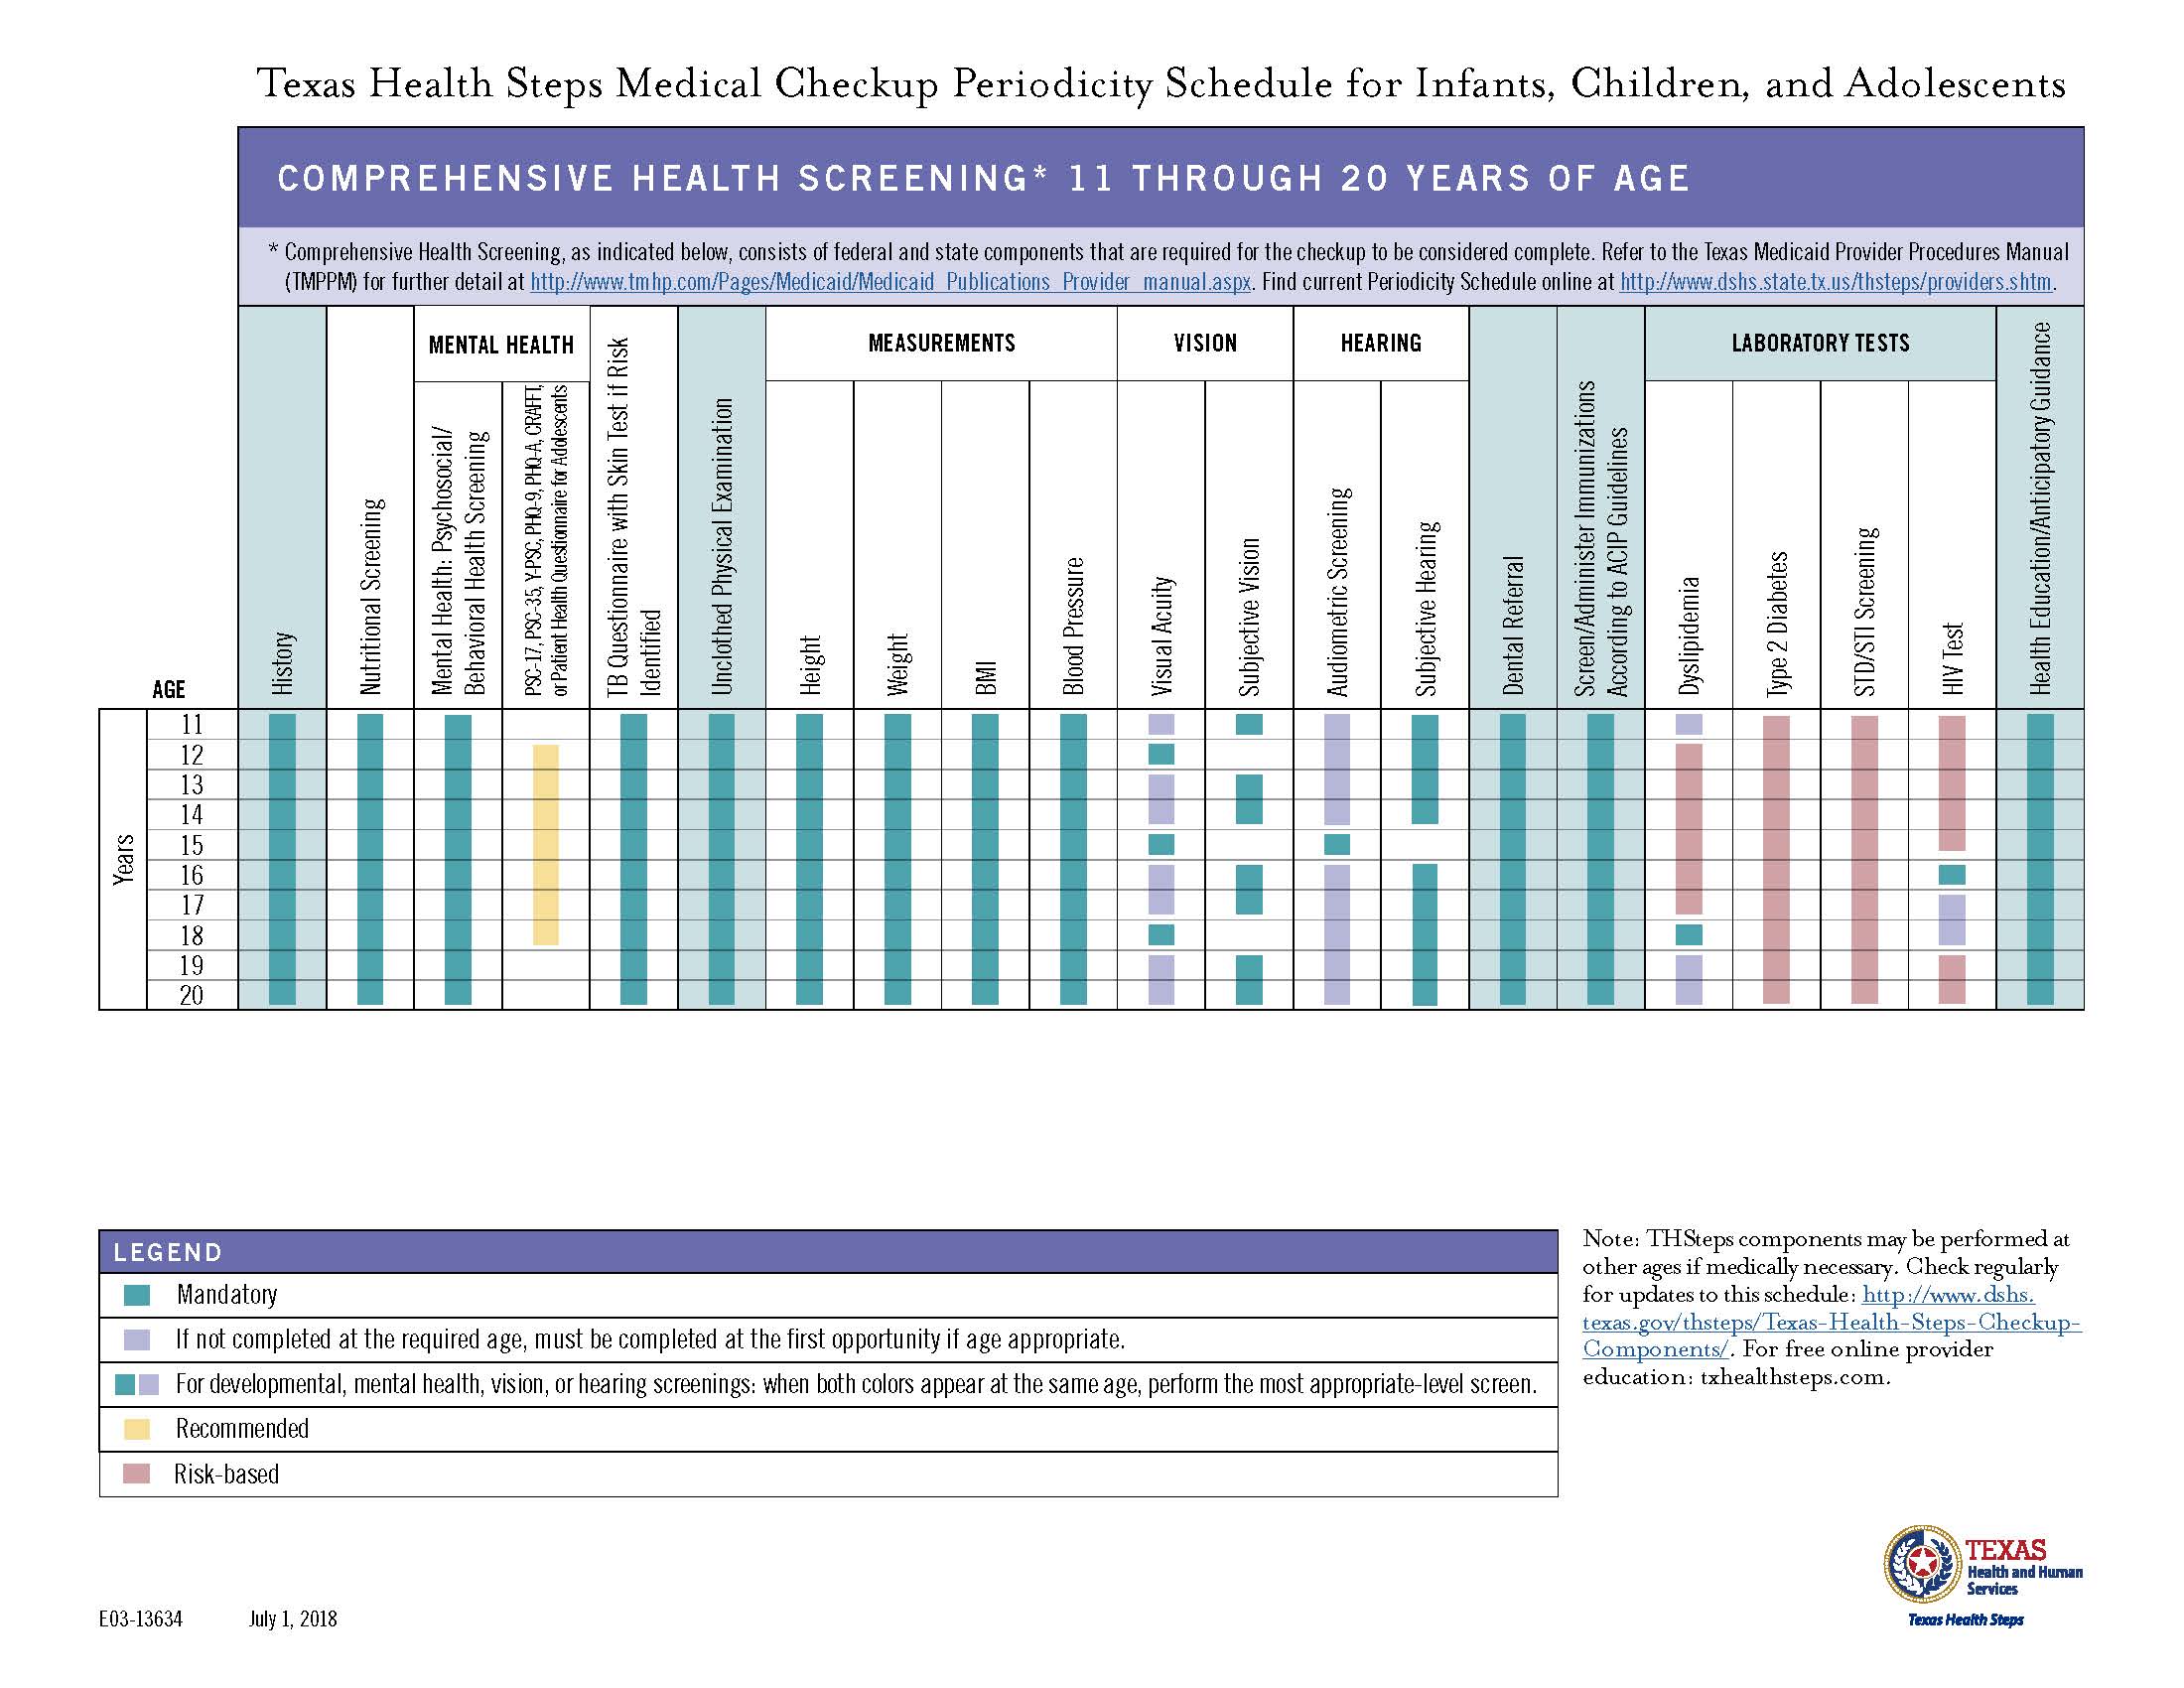 Checkup Schedule Page 2